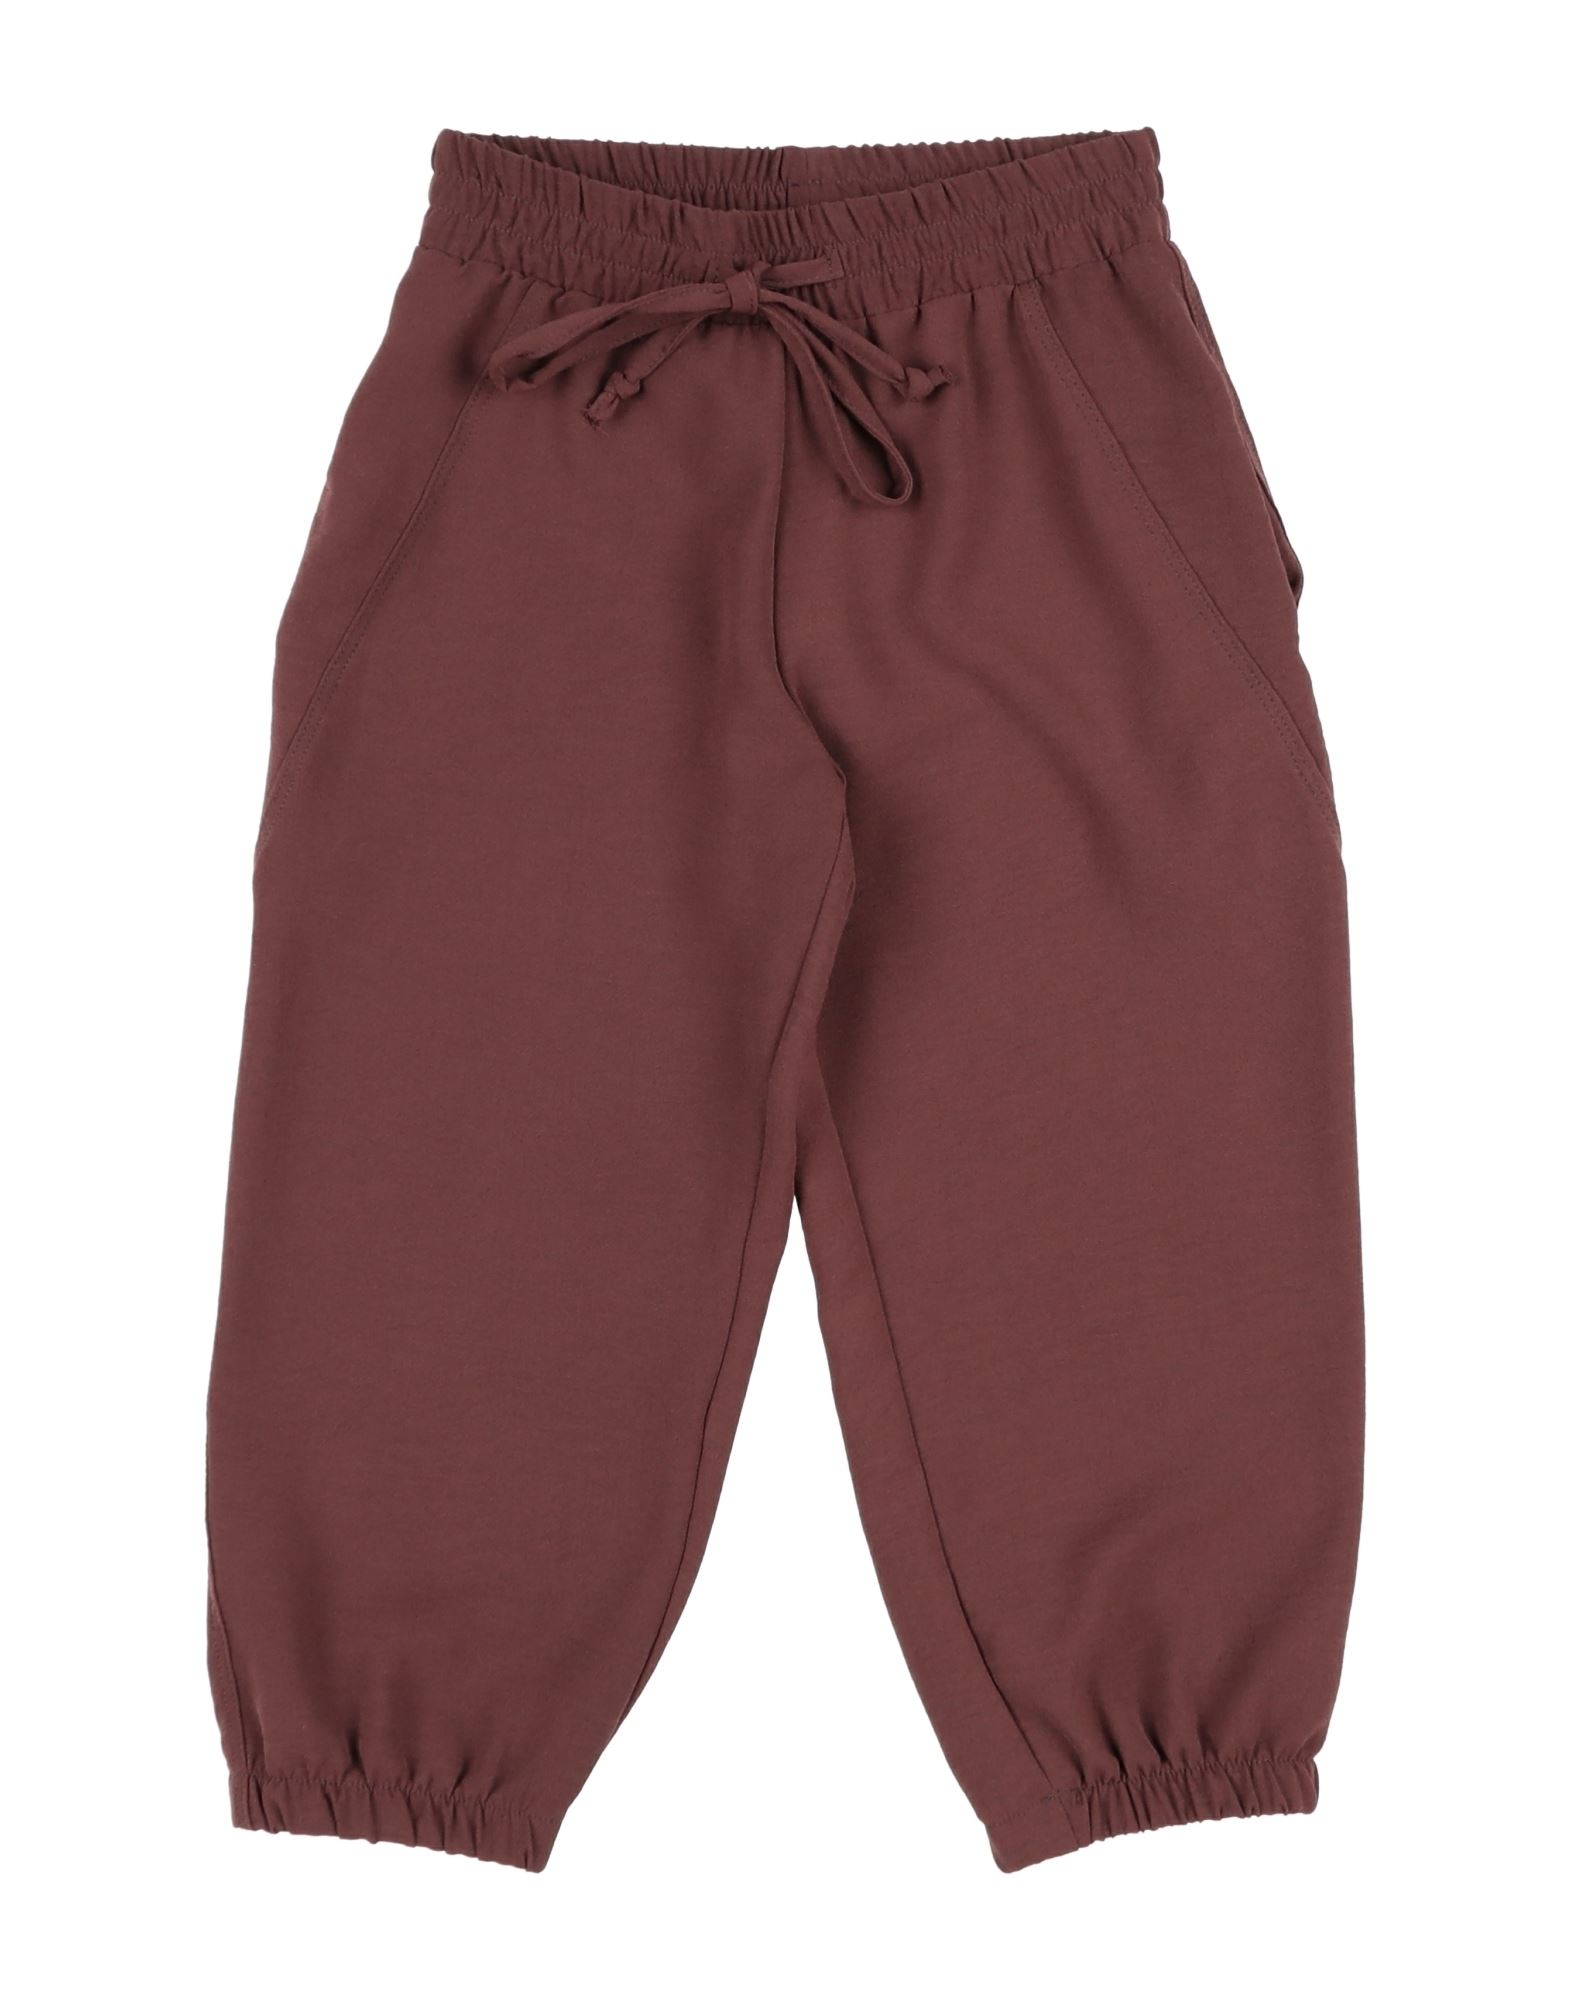 Caffe' D'orzo Kids' Caffé D'orzo Toddler Girl Pants Cocoa Size 6 Polyester In Brown